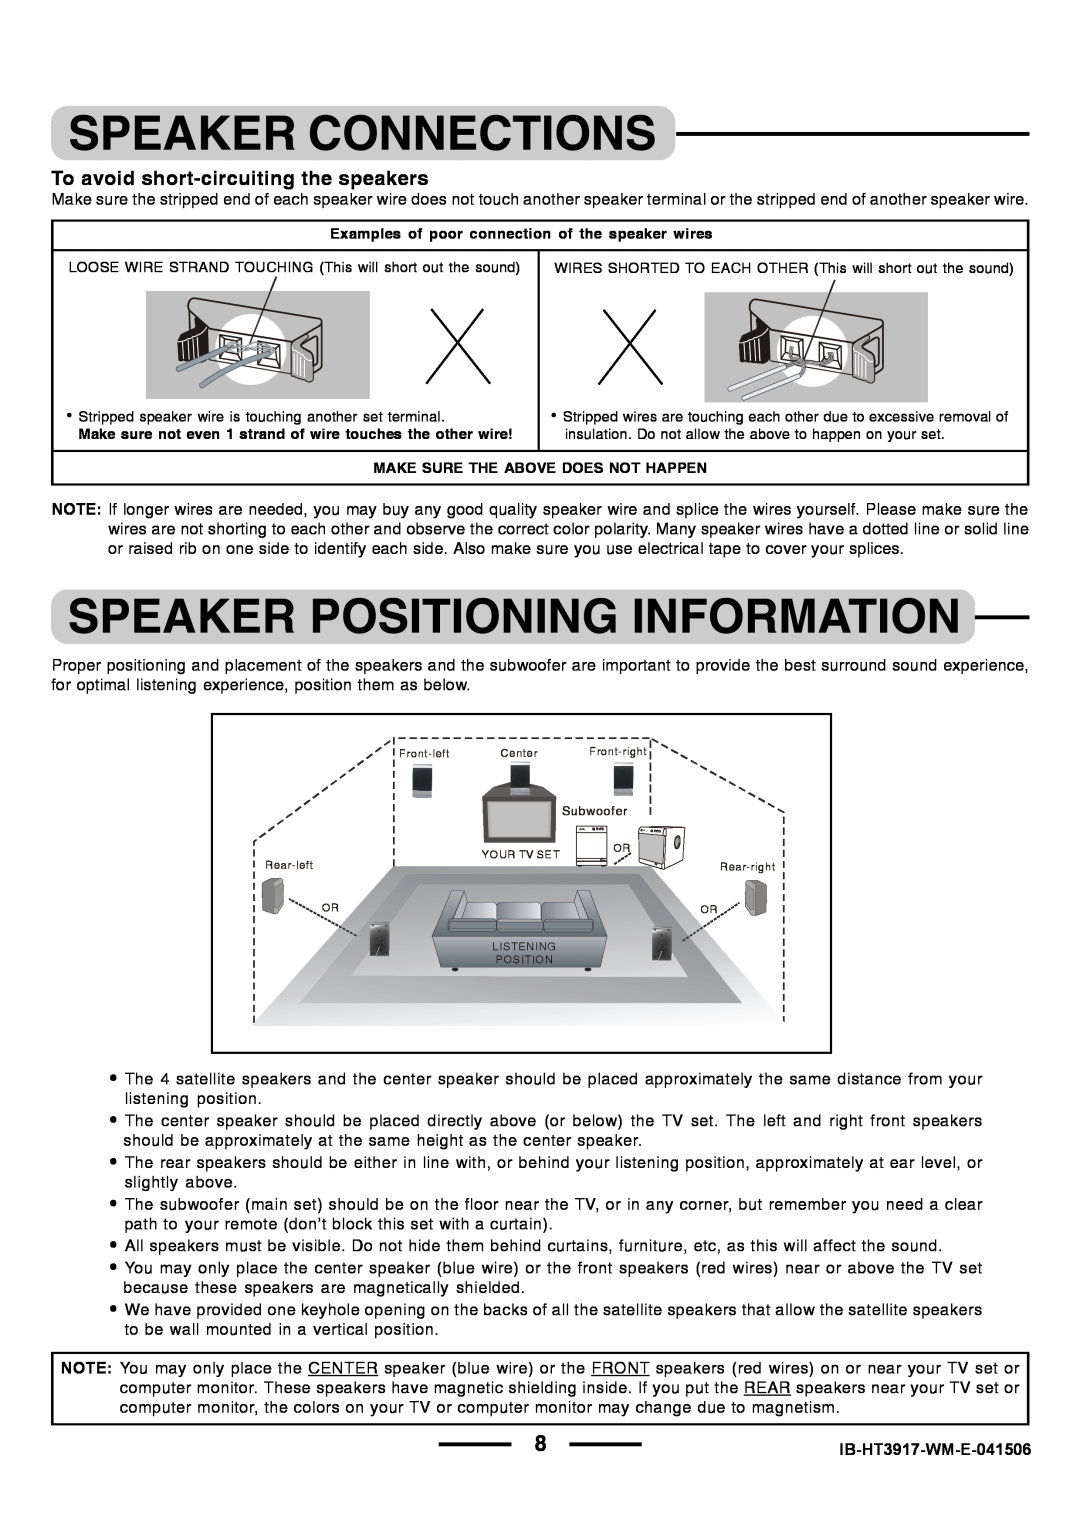 Lenoxx Electronics HT3917 manual To avoid short-circuitingthe speakers, Examples of poor connection of the speaker wires 